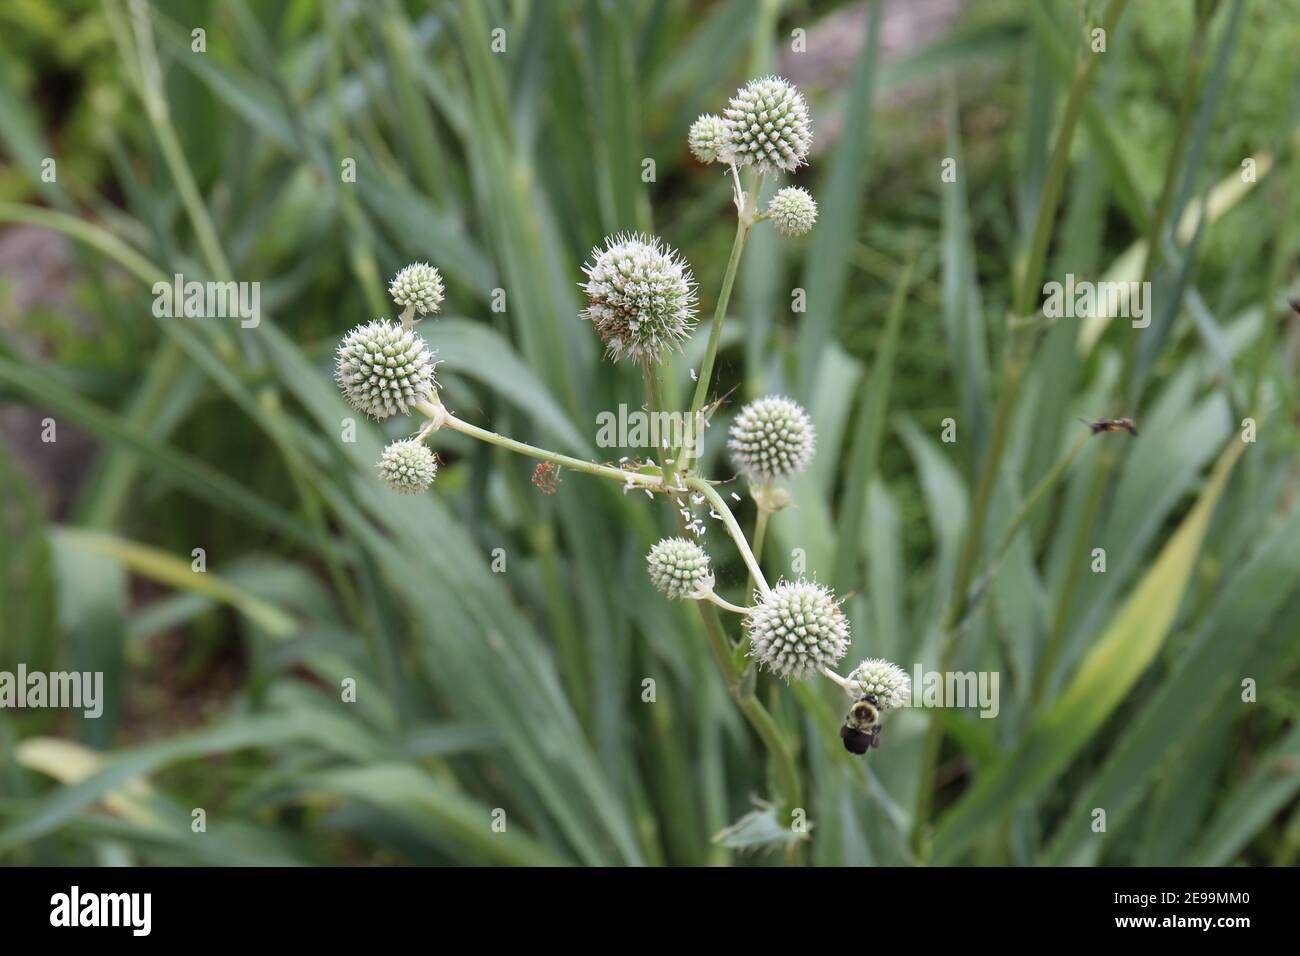 Close up of a Rattlesnake Master, Eryngium yuccifolium, plant with a bumblee gathering nectar from the flowers in Wisconsin, USA Stock Photo